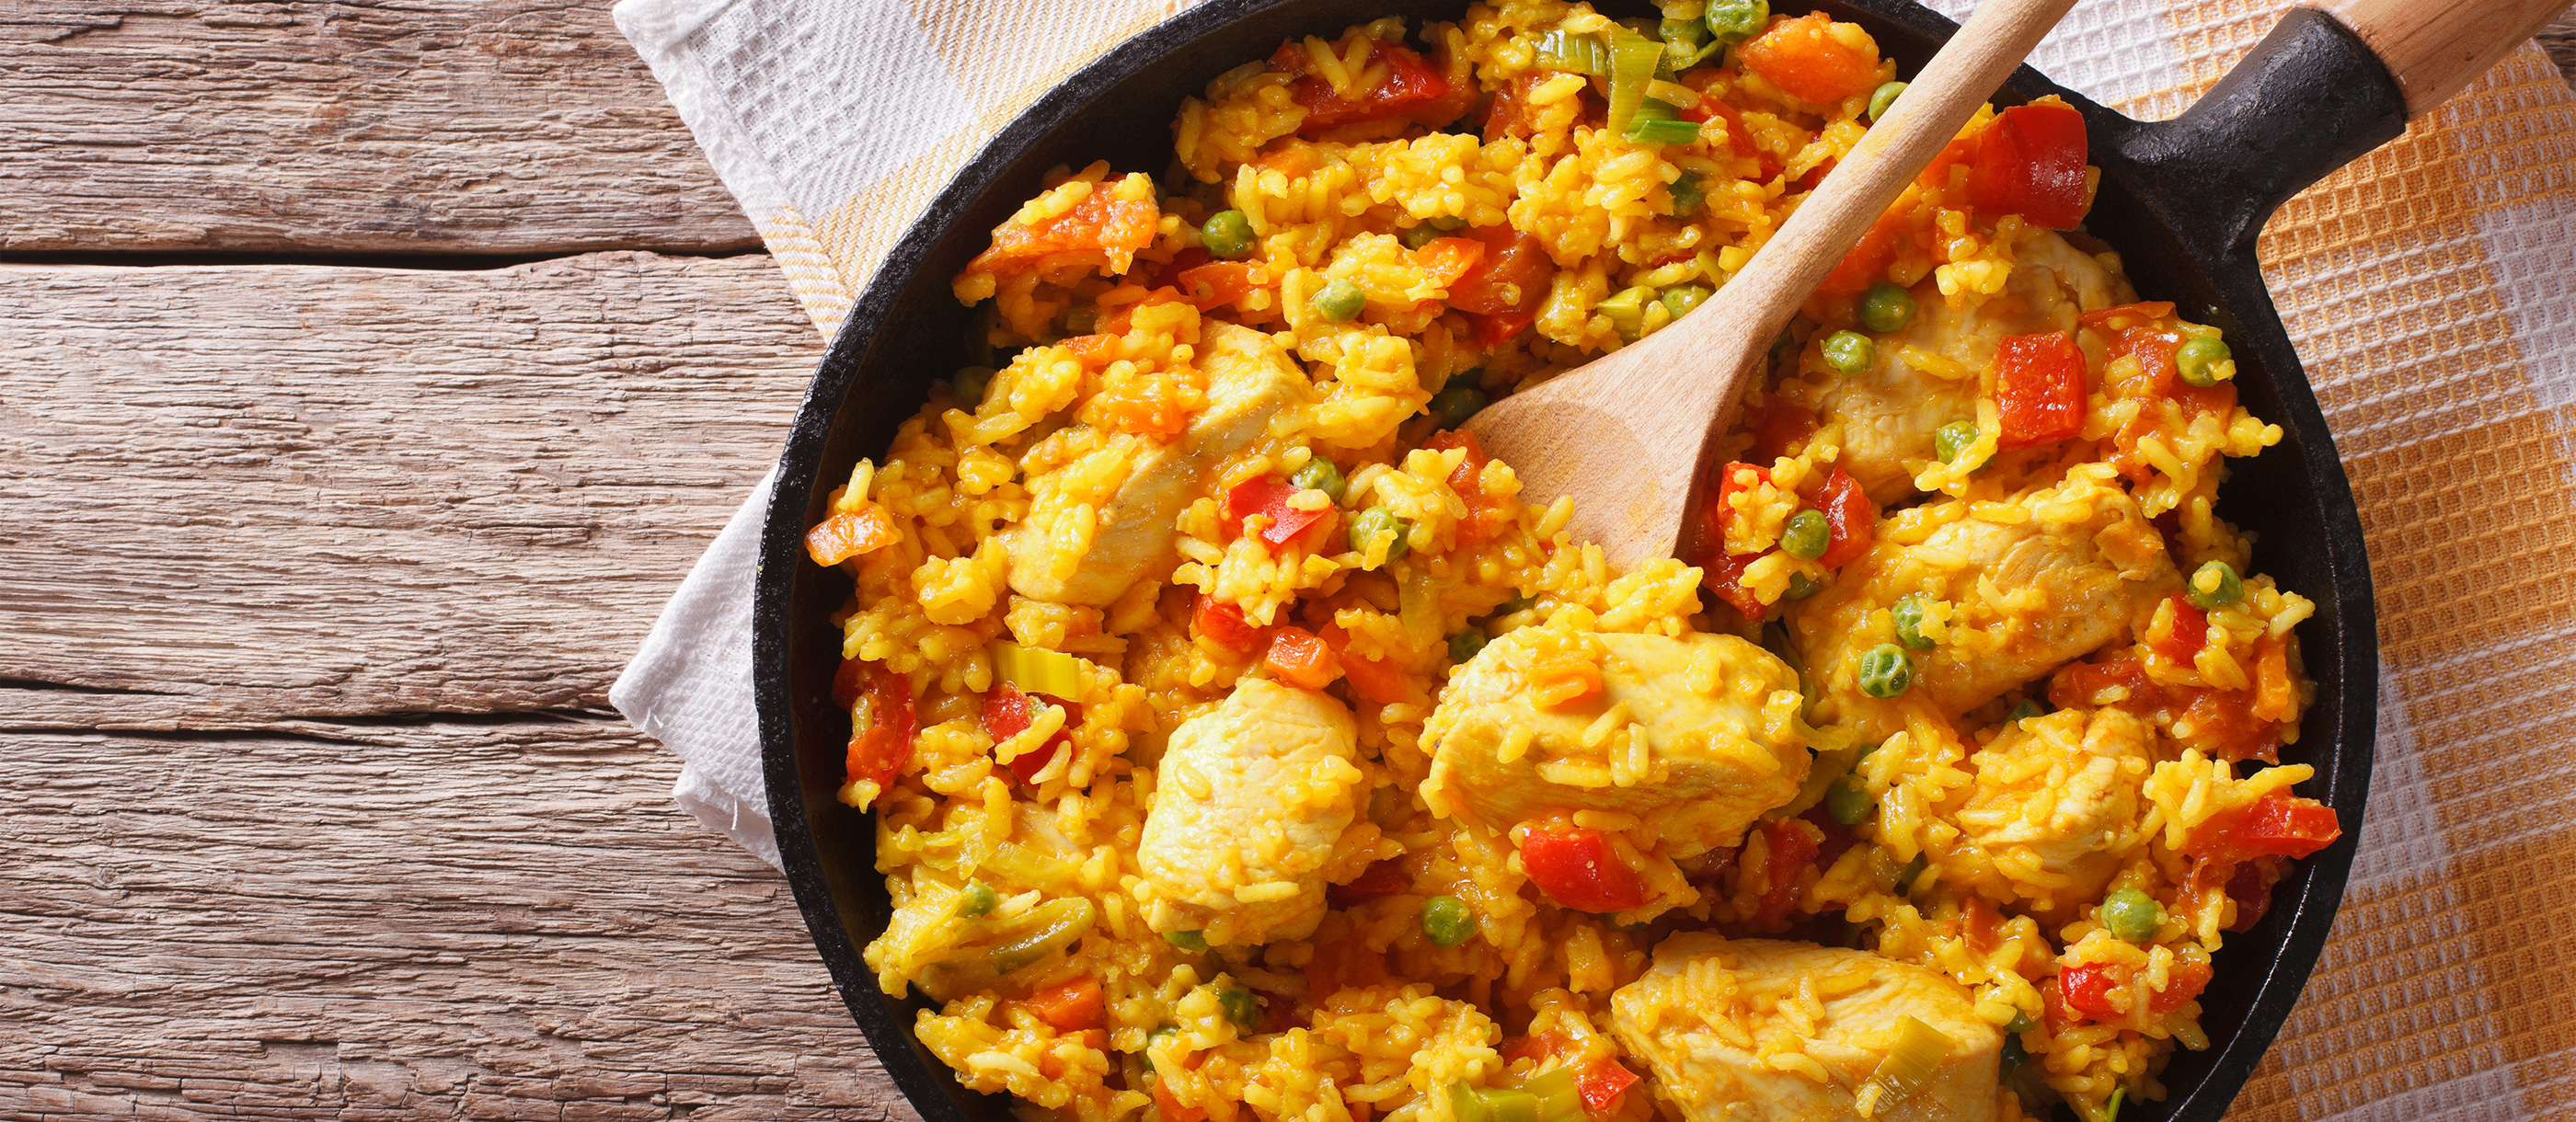 Arroz Con Pollo | Traditional Rice Dish From Spain